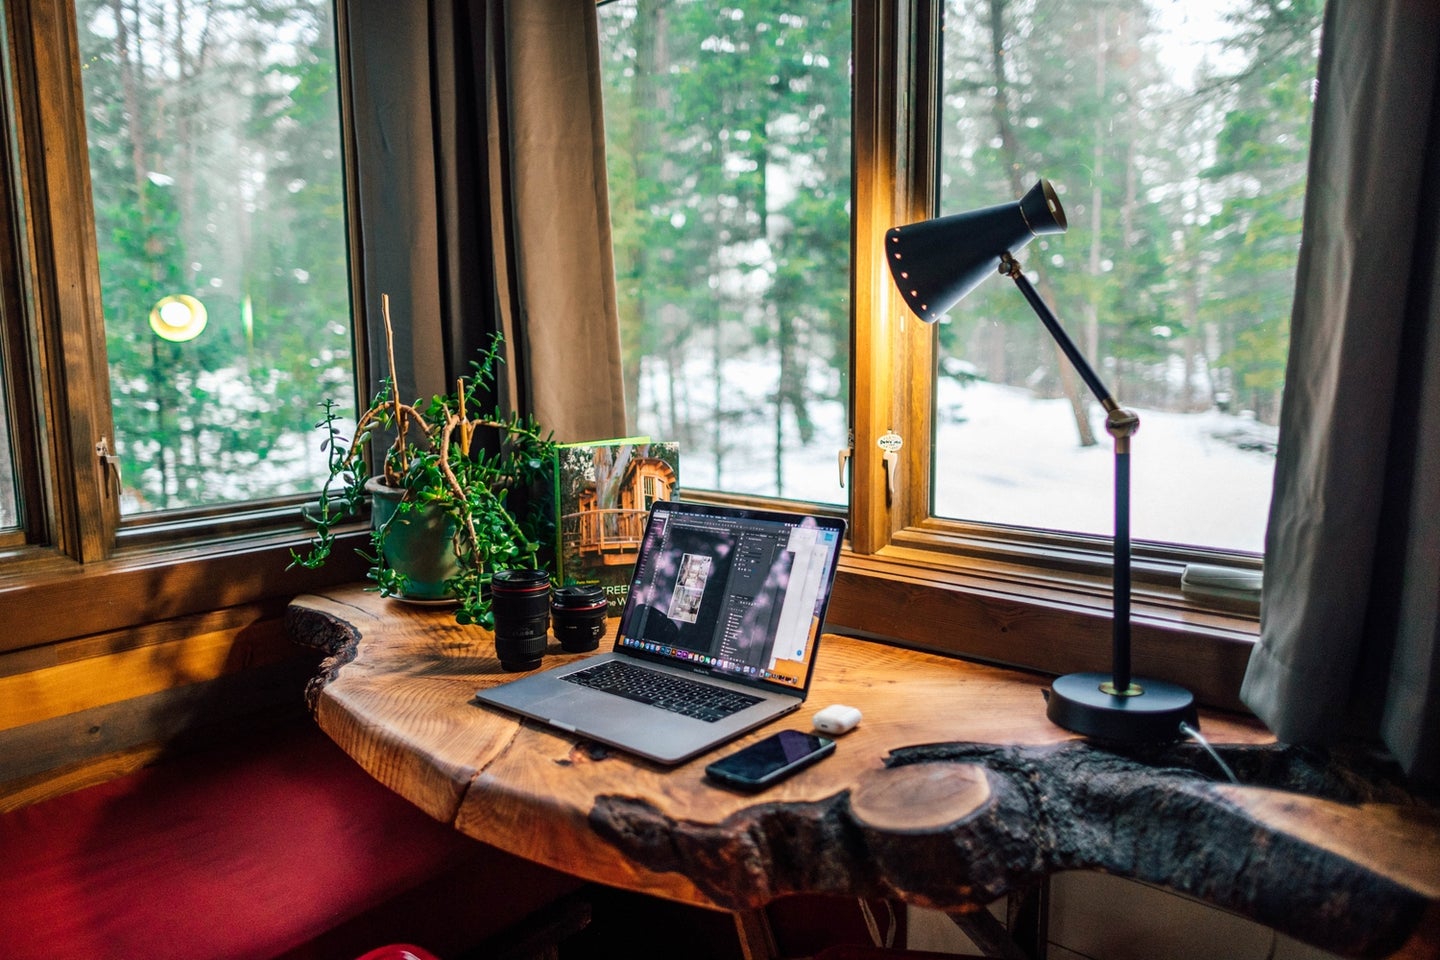 a home office with a solid wood desk and many windows looking out onto a snow-covered forest